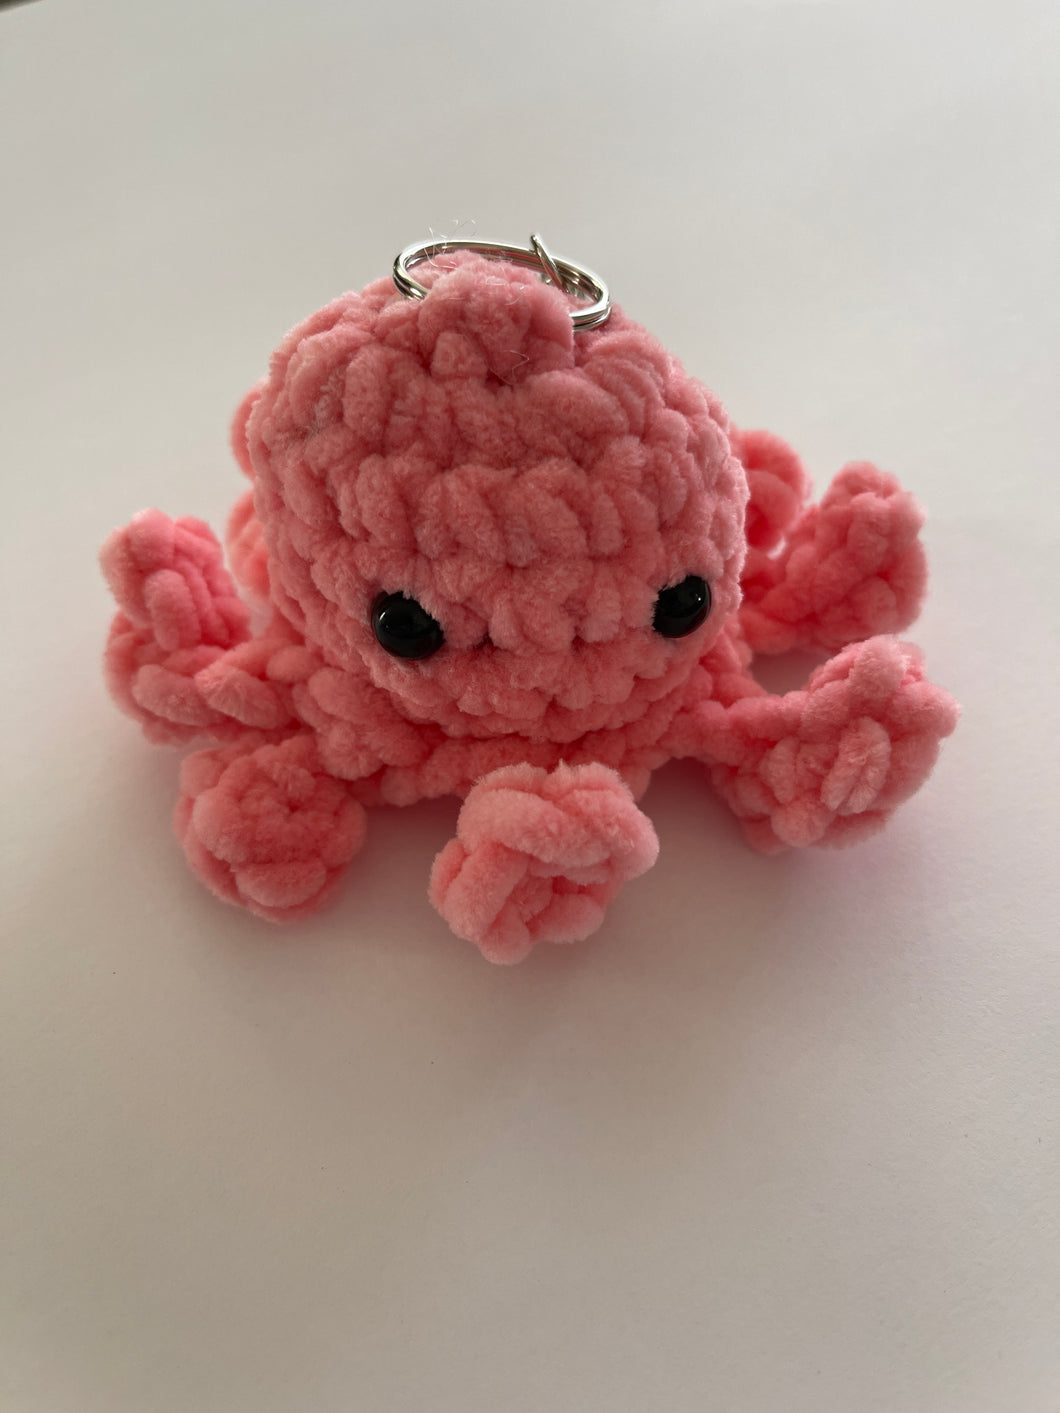 Crochet Mini Octopus Keychains and Backpack Buddies